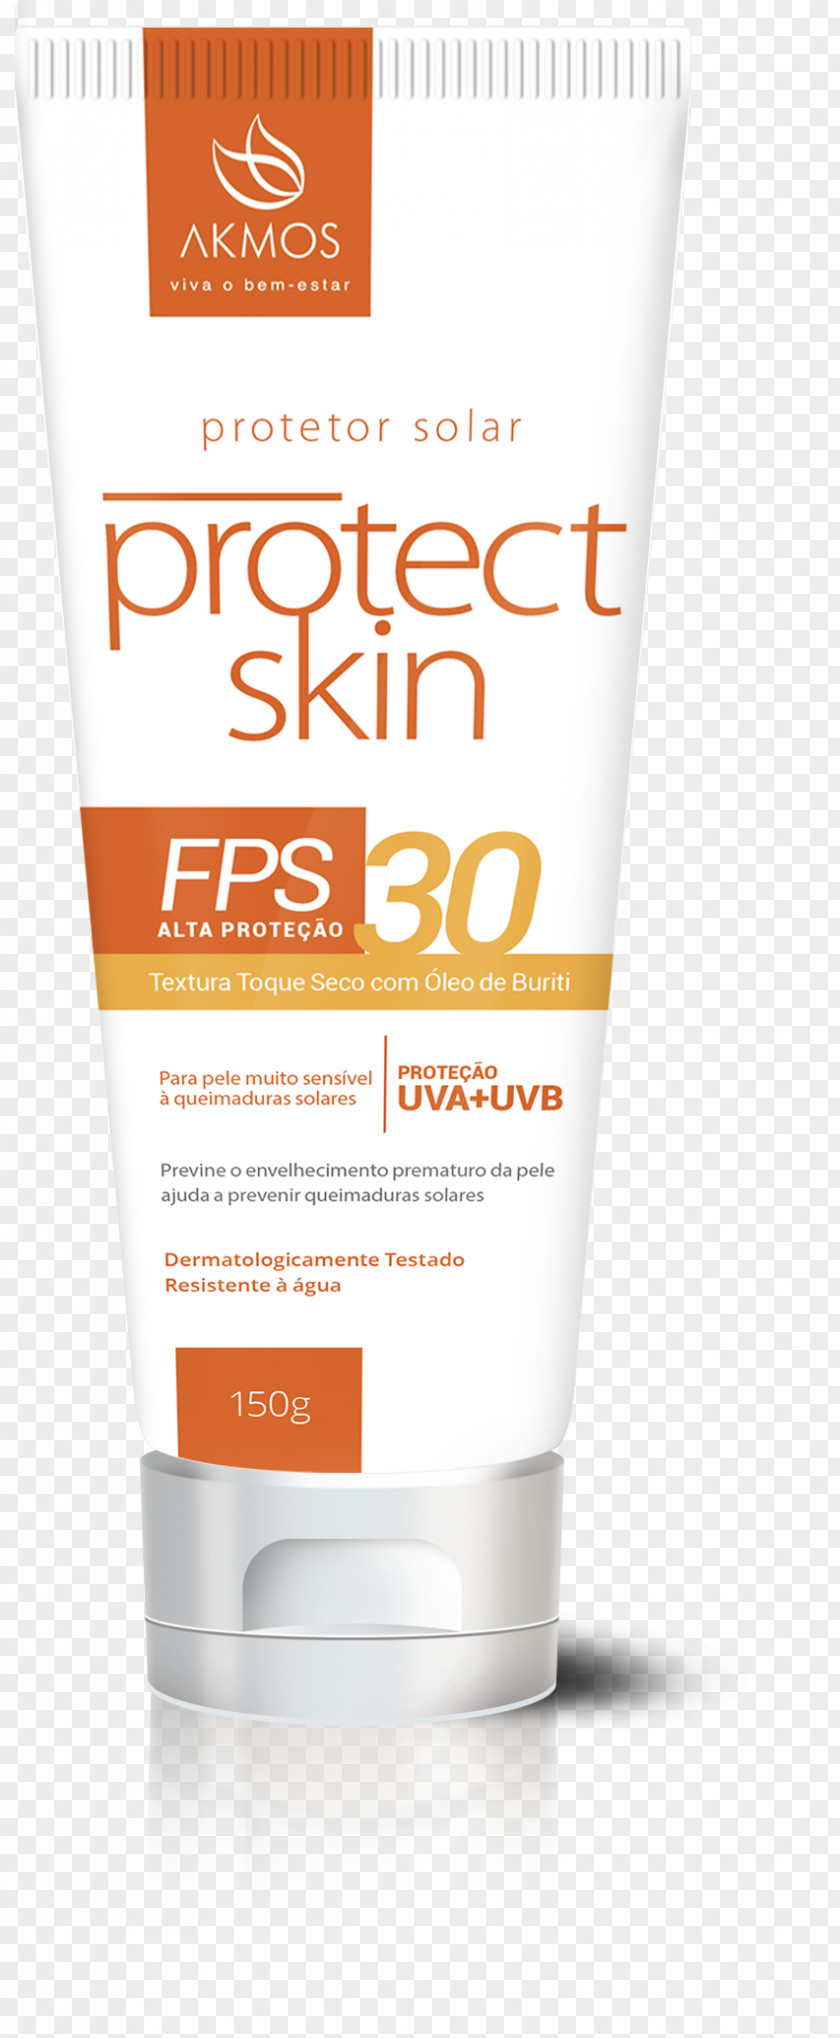 Protect Skin Sunscreen Cream Lotion Product PNG